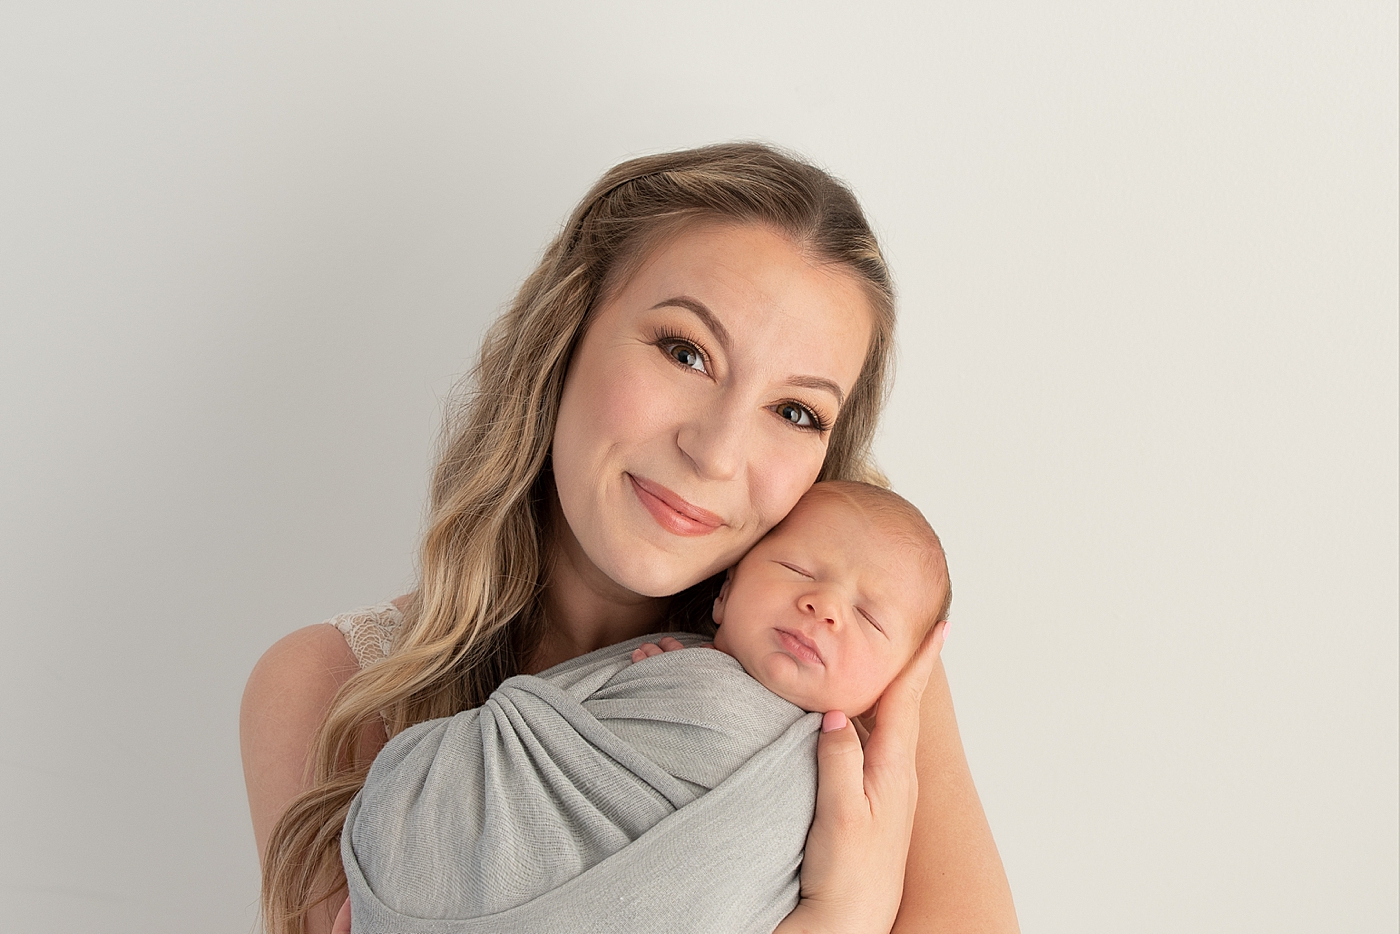 Studio newborn session in Chagrin Falls with baby boy. Photo by Rachel Brookes Photography.